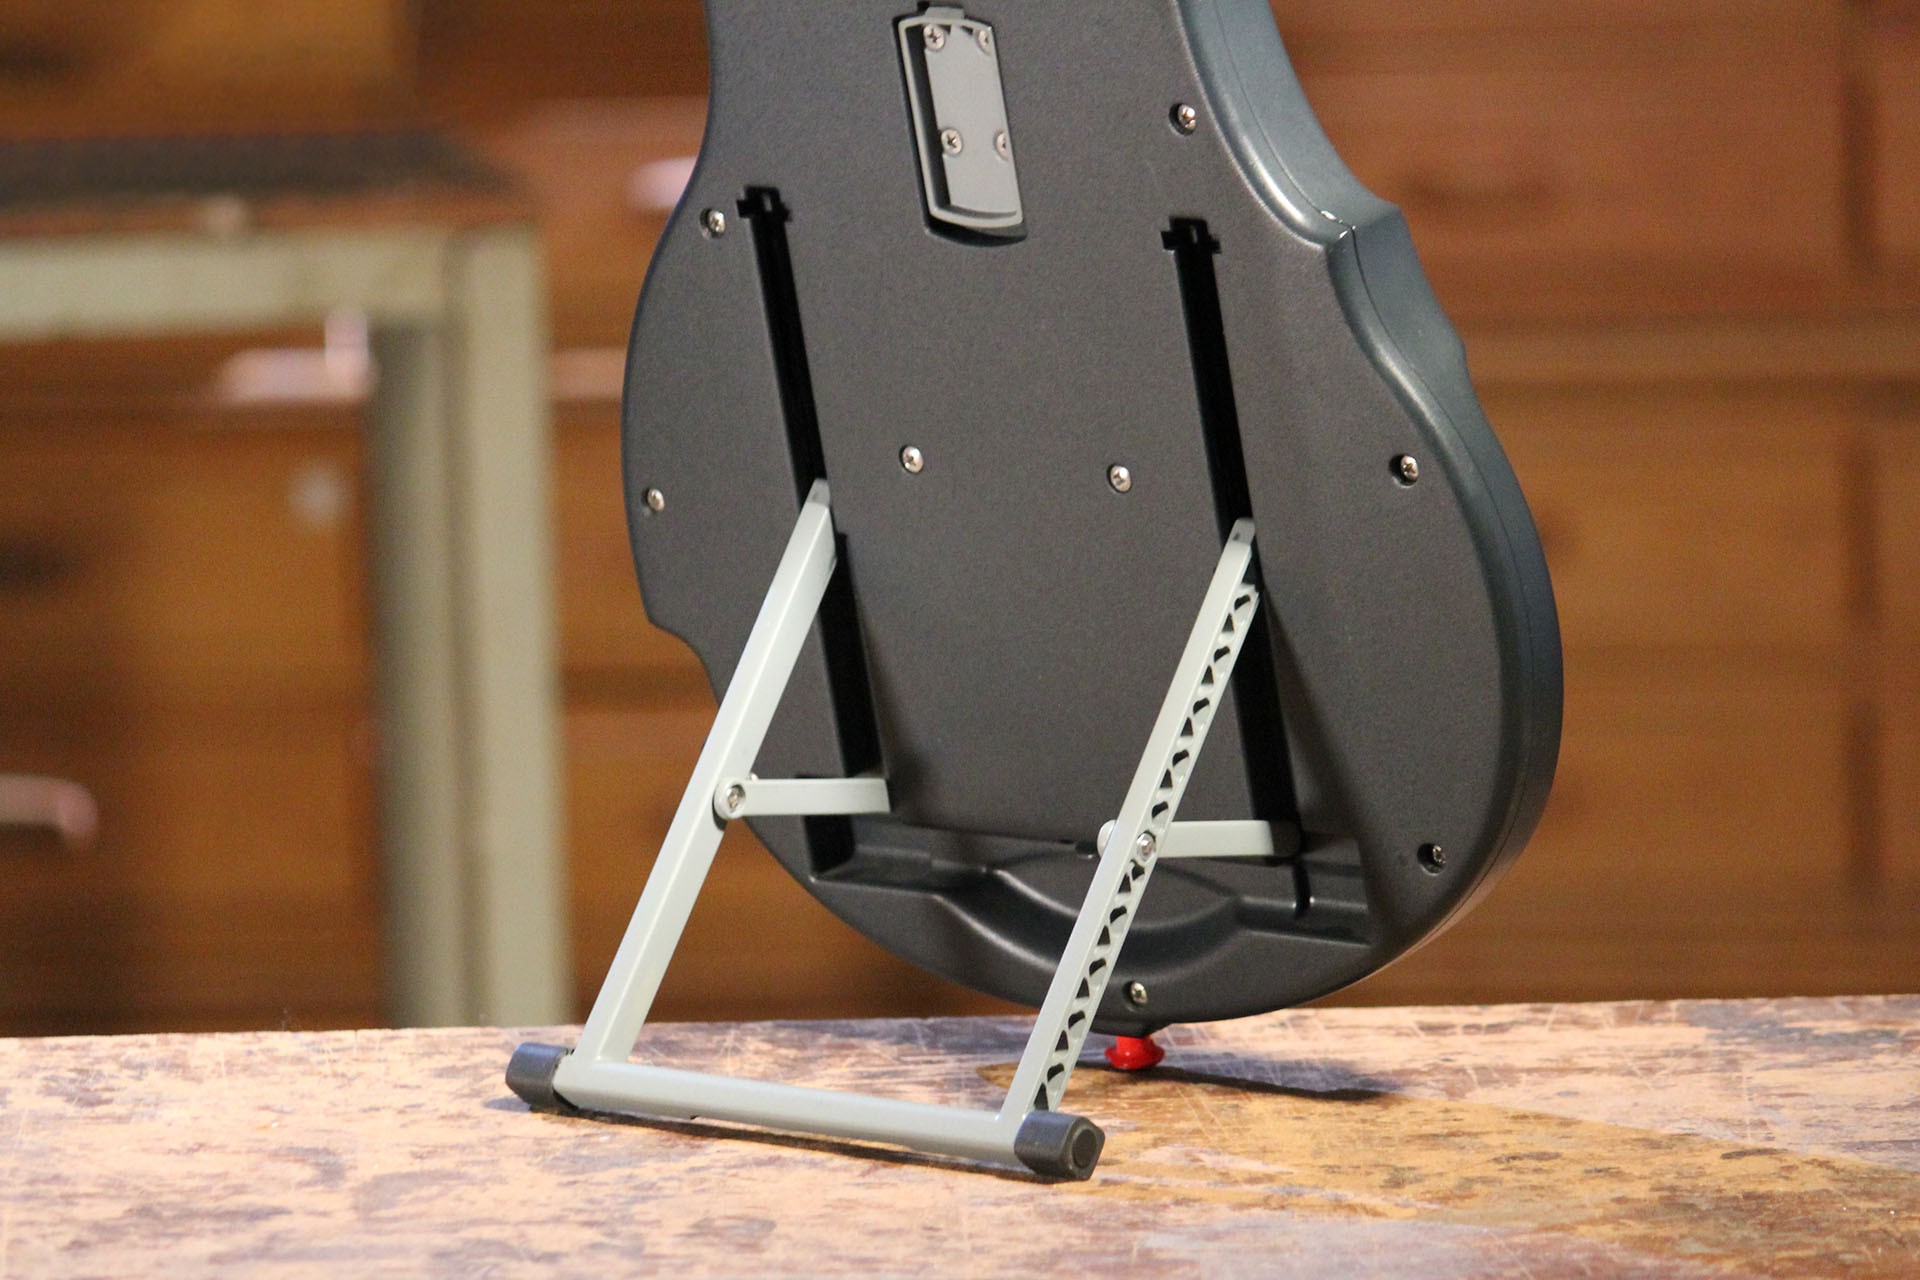 The modular guitar for the day collected on Kickstarter six times the required amount